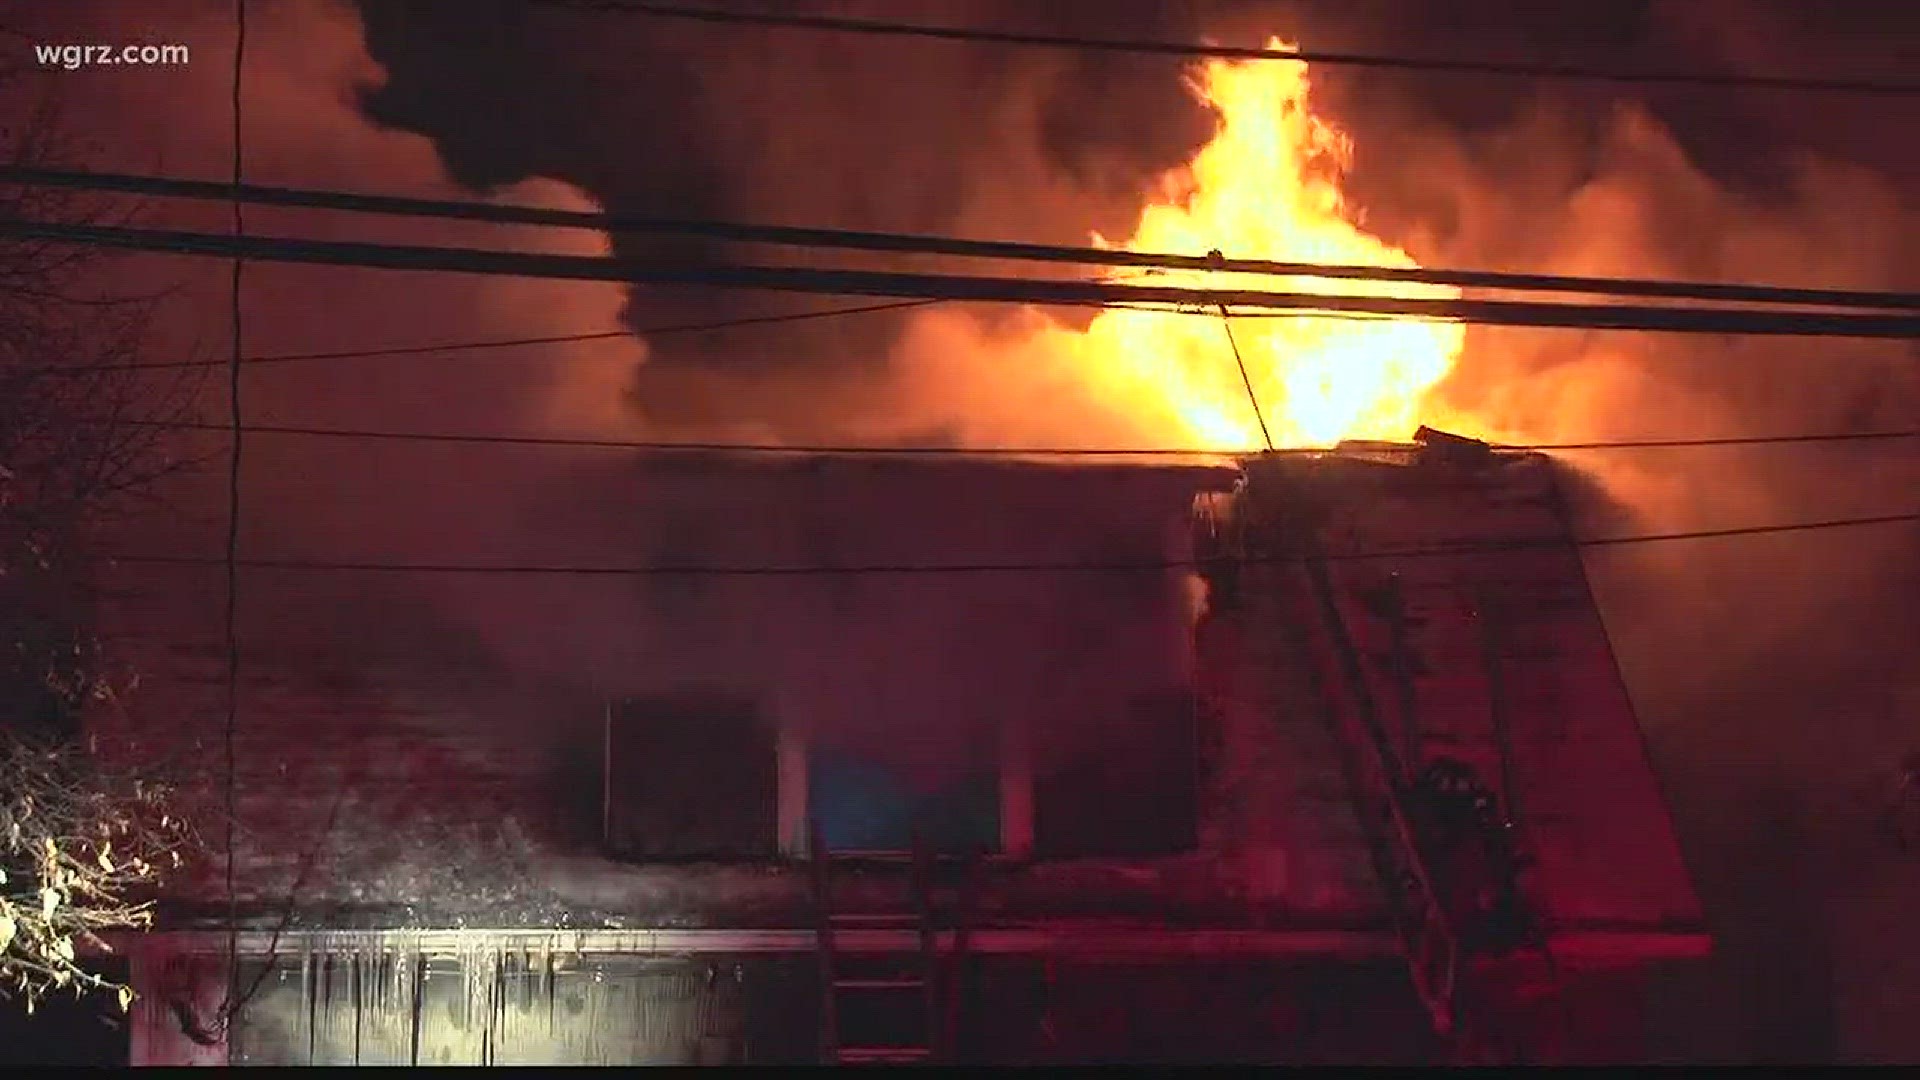 The Red Cross is helping a family on Buffalo's West Side following a fire early Sunday morning.